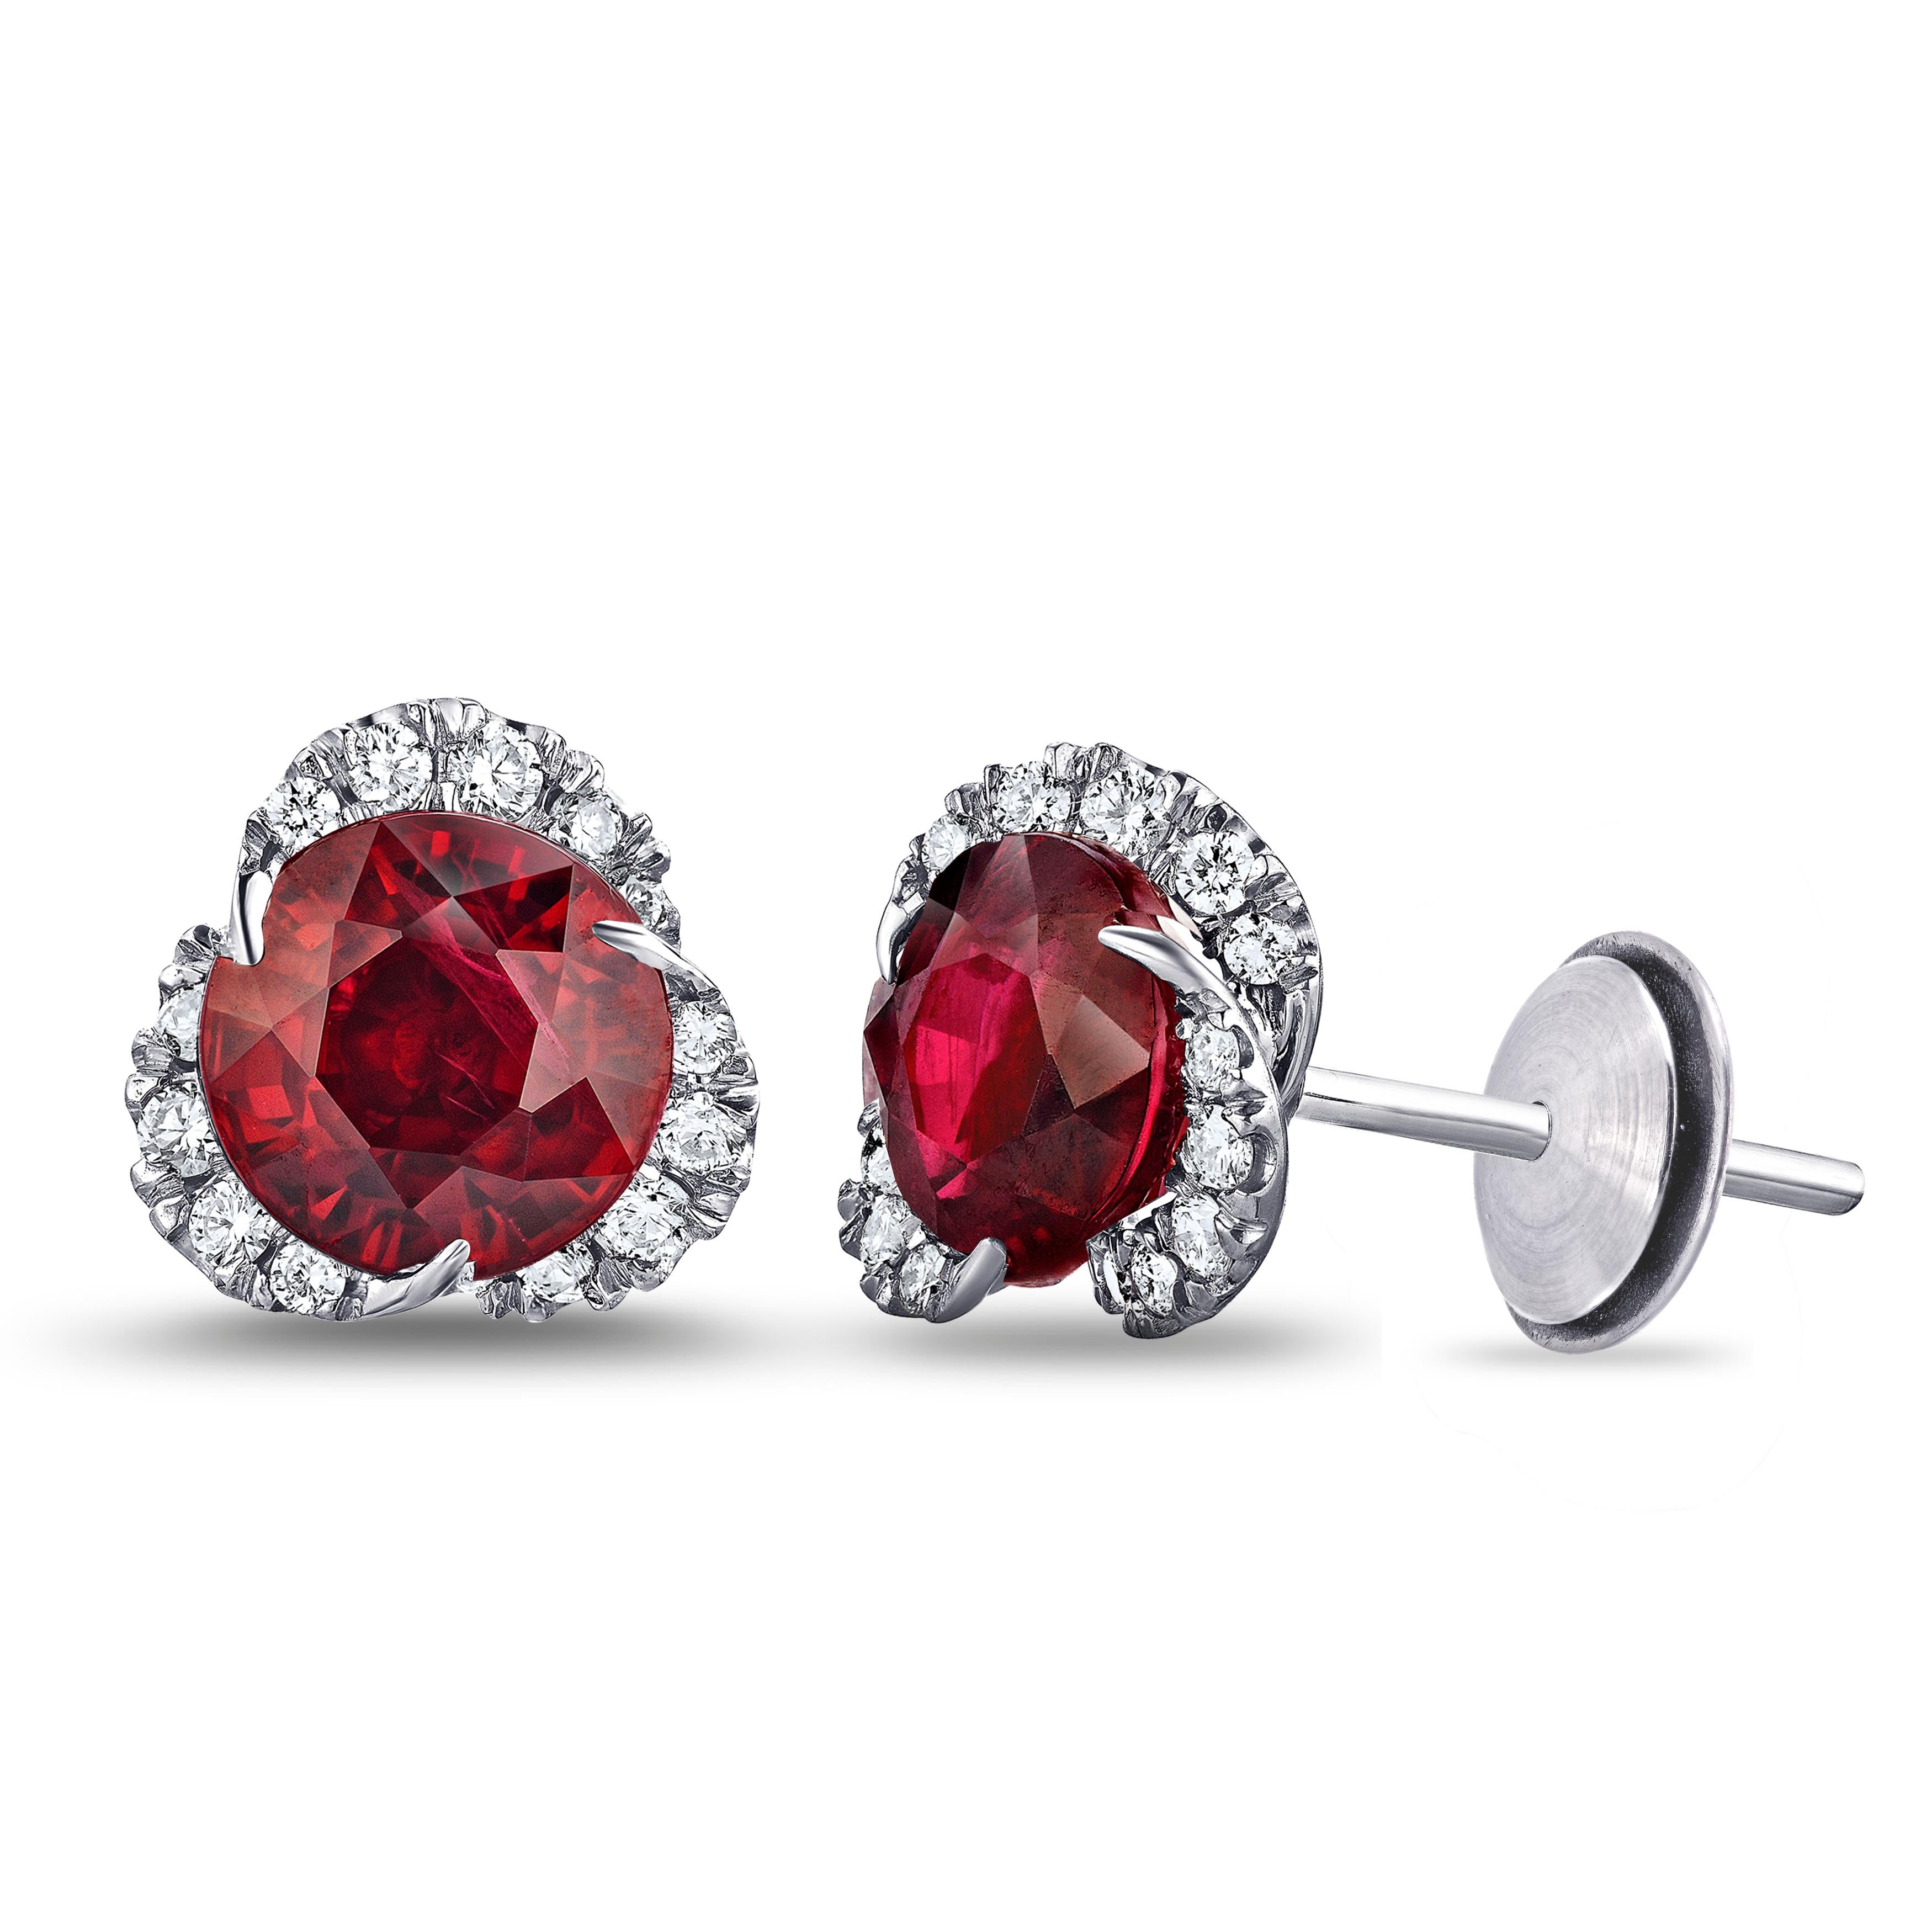 Two round red rubies weighing 2.92 carats set with 30 round diamonds weighing .38 carats (F+ VVS/VS+). Set in hand made platinum.